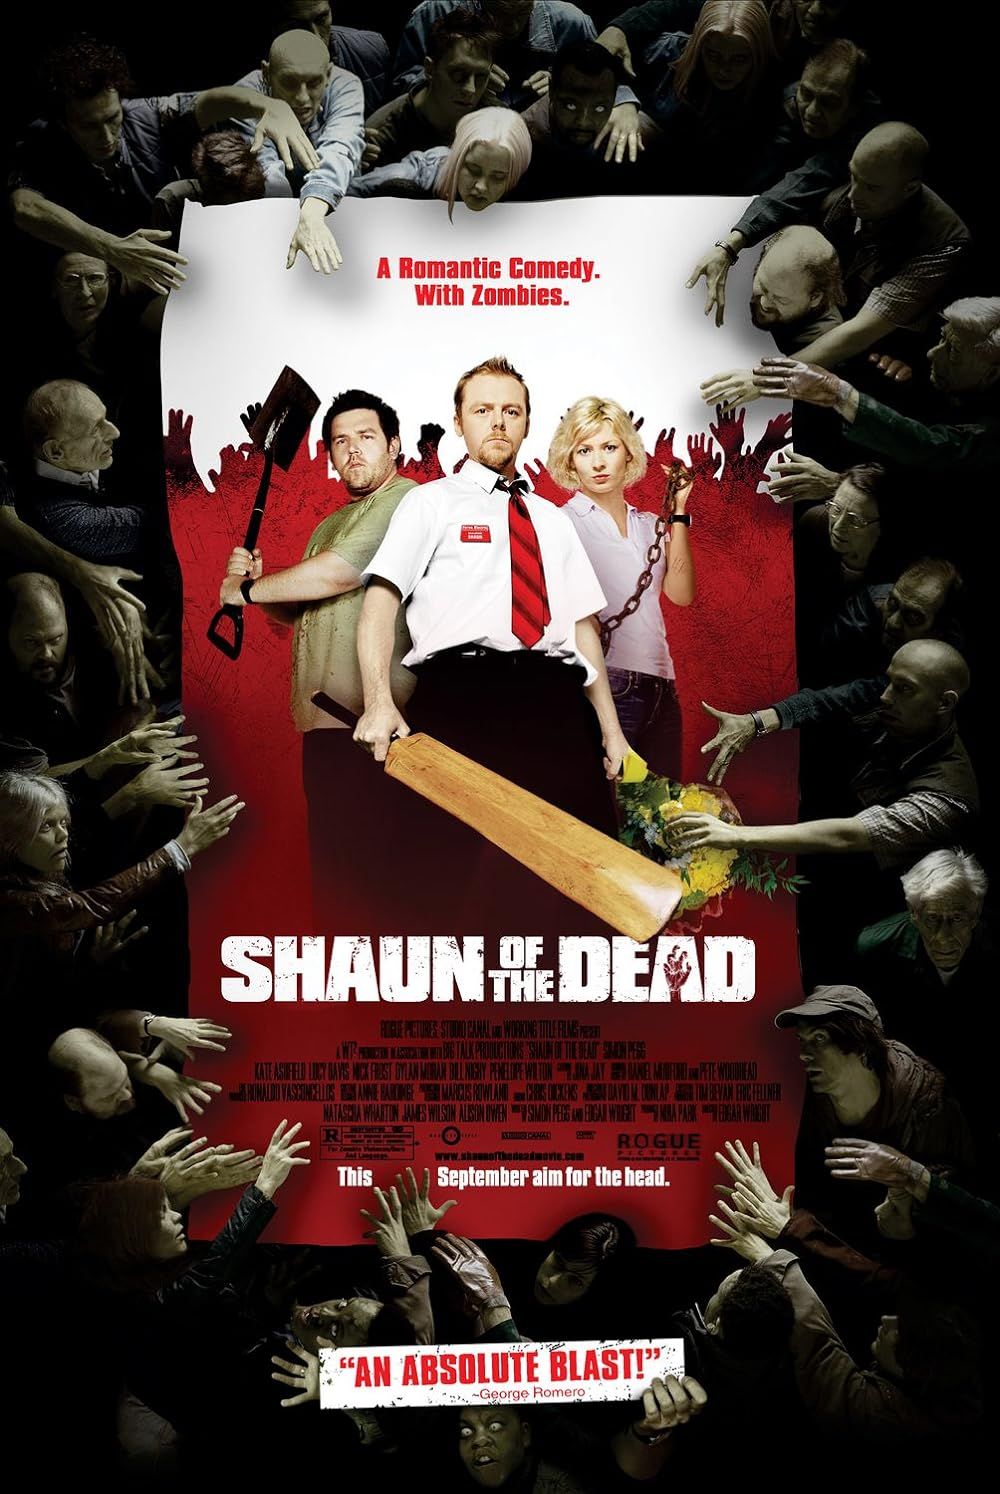 Kate Ashfield, Nick Frost, and Simon Pegg posing with weapons in Shaun of the Dead poster